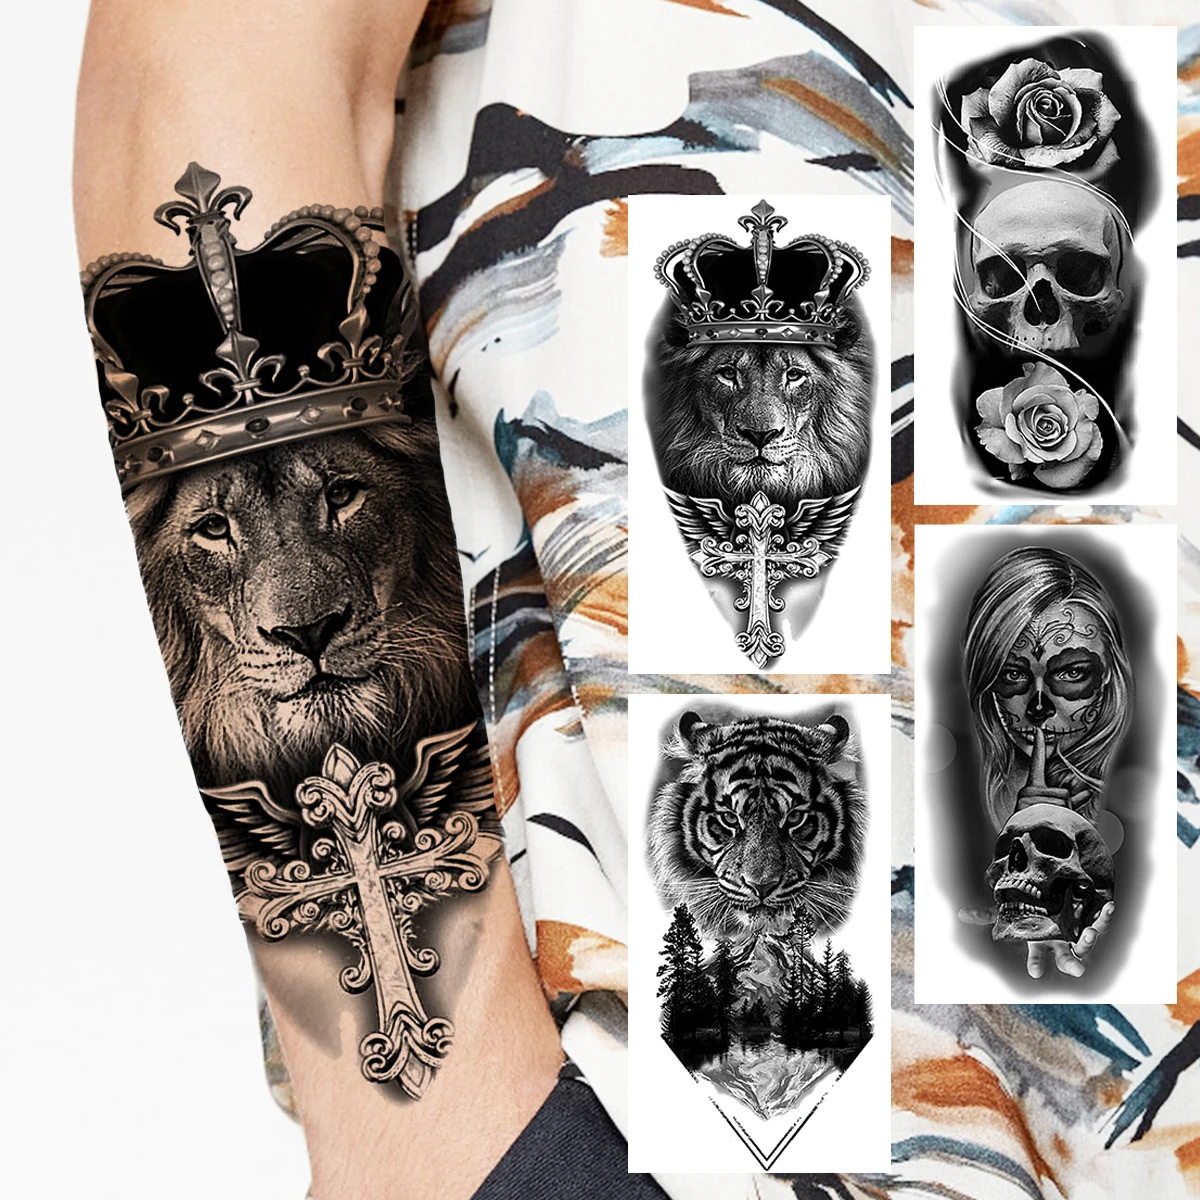 

Lion Crown Cross Temporary Tattoos For Men Women Realistic Scary Tiger Forest Vampire Fake Tattoo Sticker Forearm Body Tatoos 3D